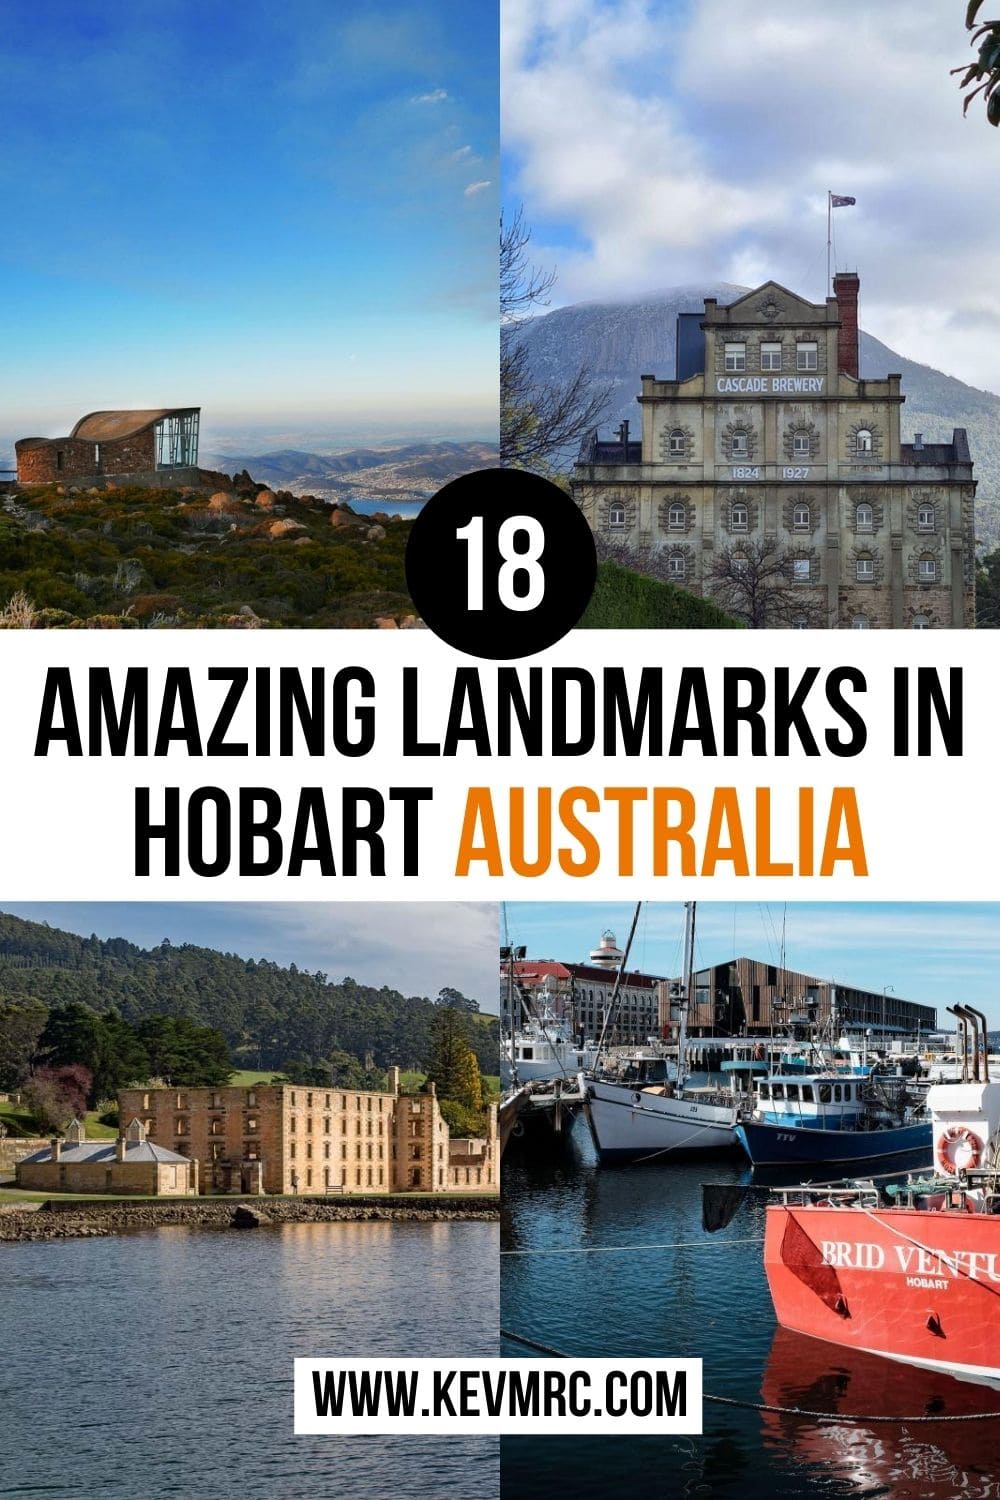 Capital of Tasmania, Hobart is a city with a friendly atmosphere and a picturesque colonial charm. Here is the list of the best 18 landmarks you can find in Hobart and nearby! hobart tasmania things to do | things to do in hobart | hobart australia tasmania | what to do in hobart tasmania